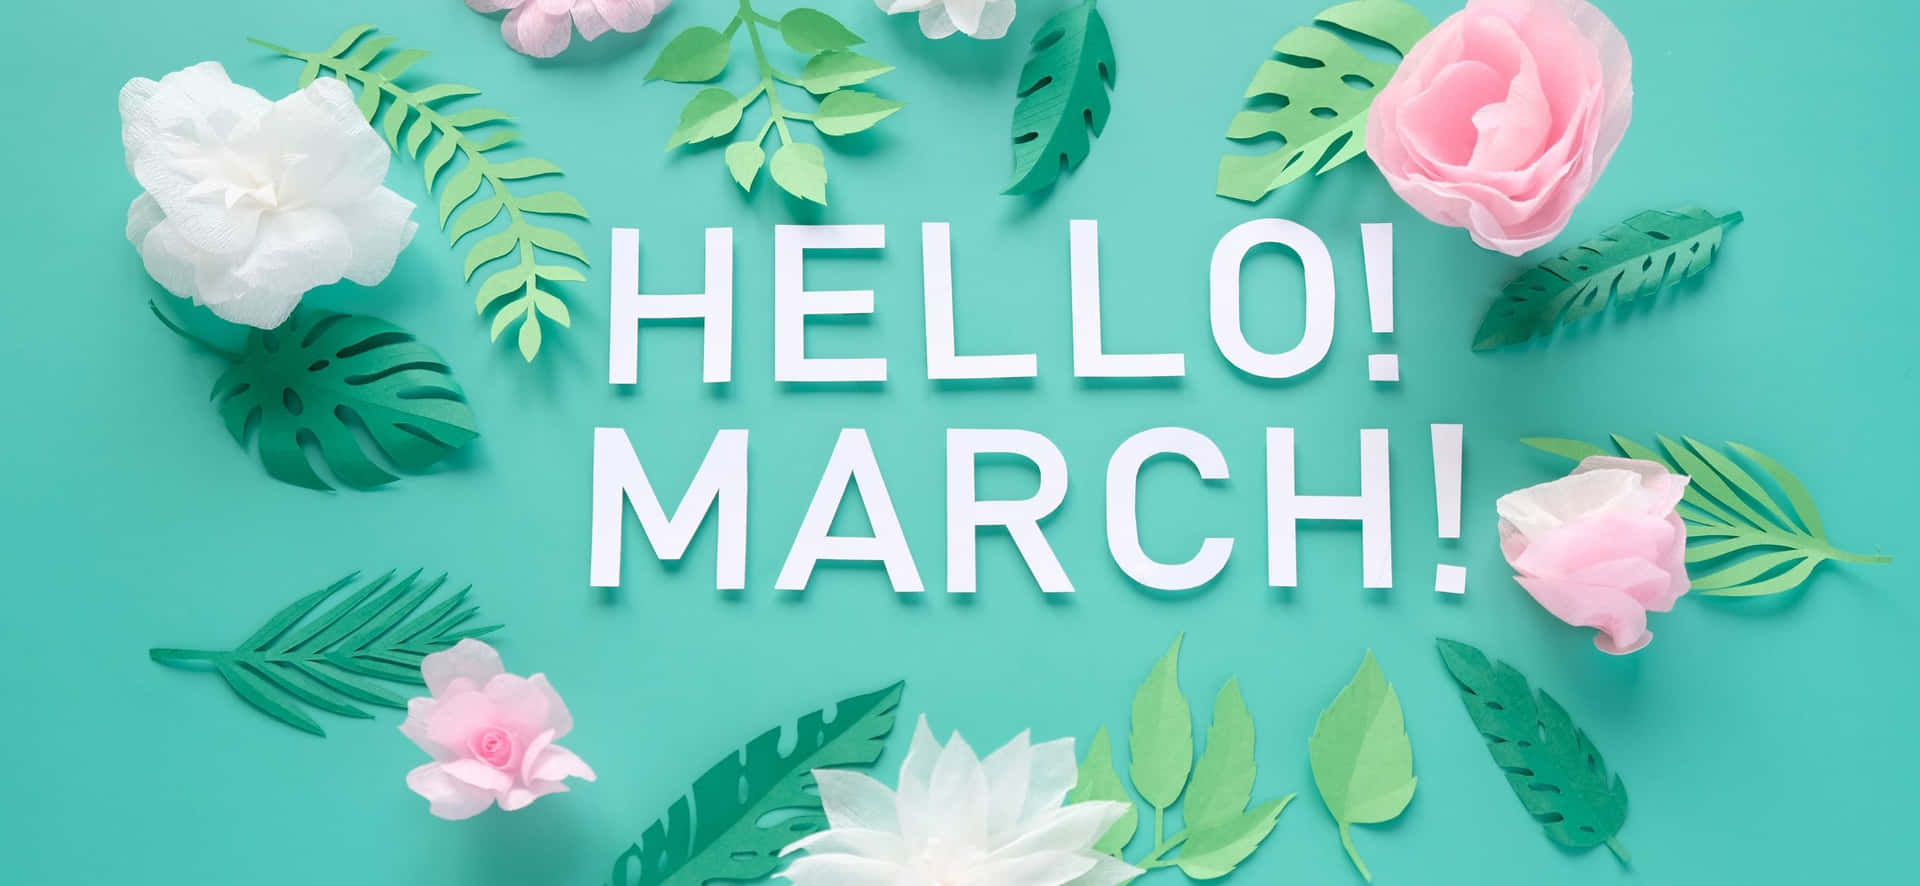 Hello March Paper Cut Outs On A Turquoise Background Wallpaper